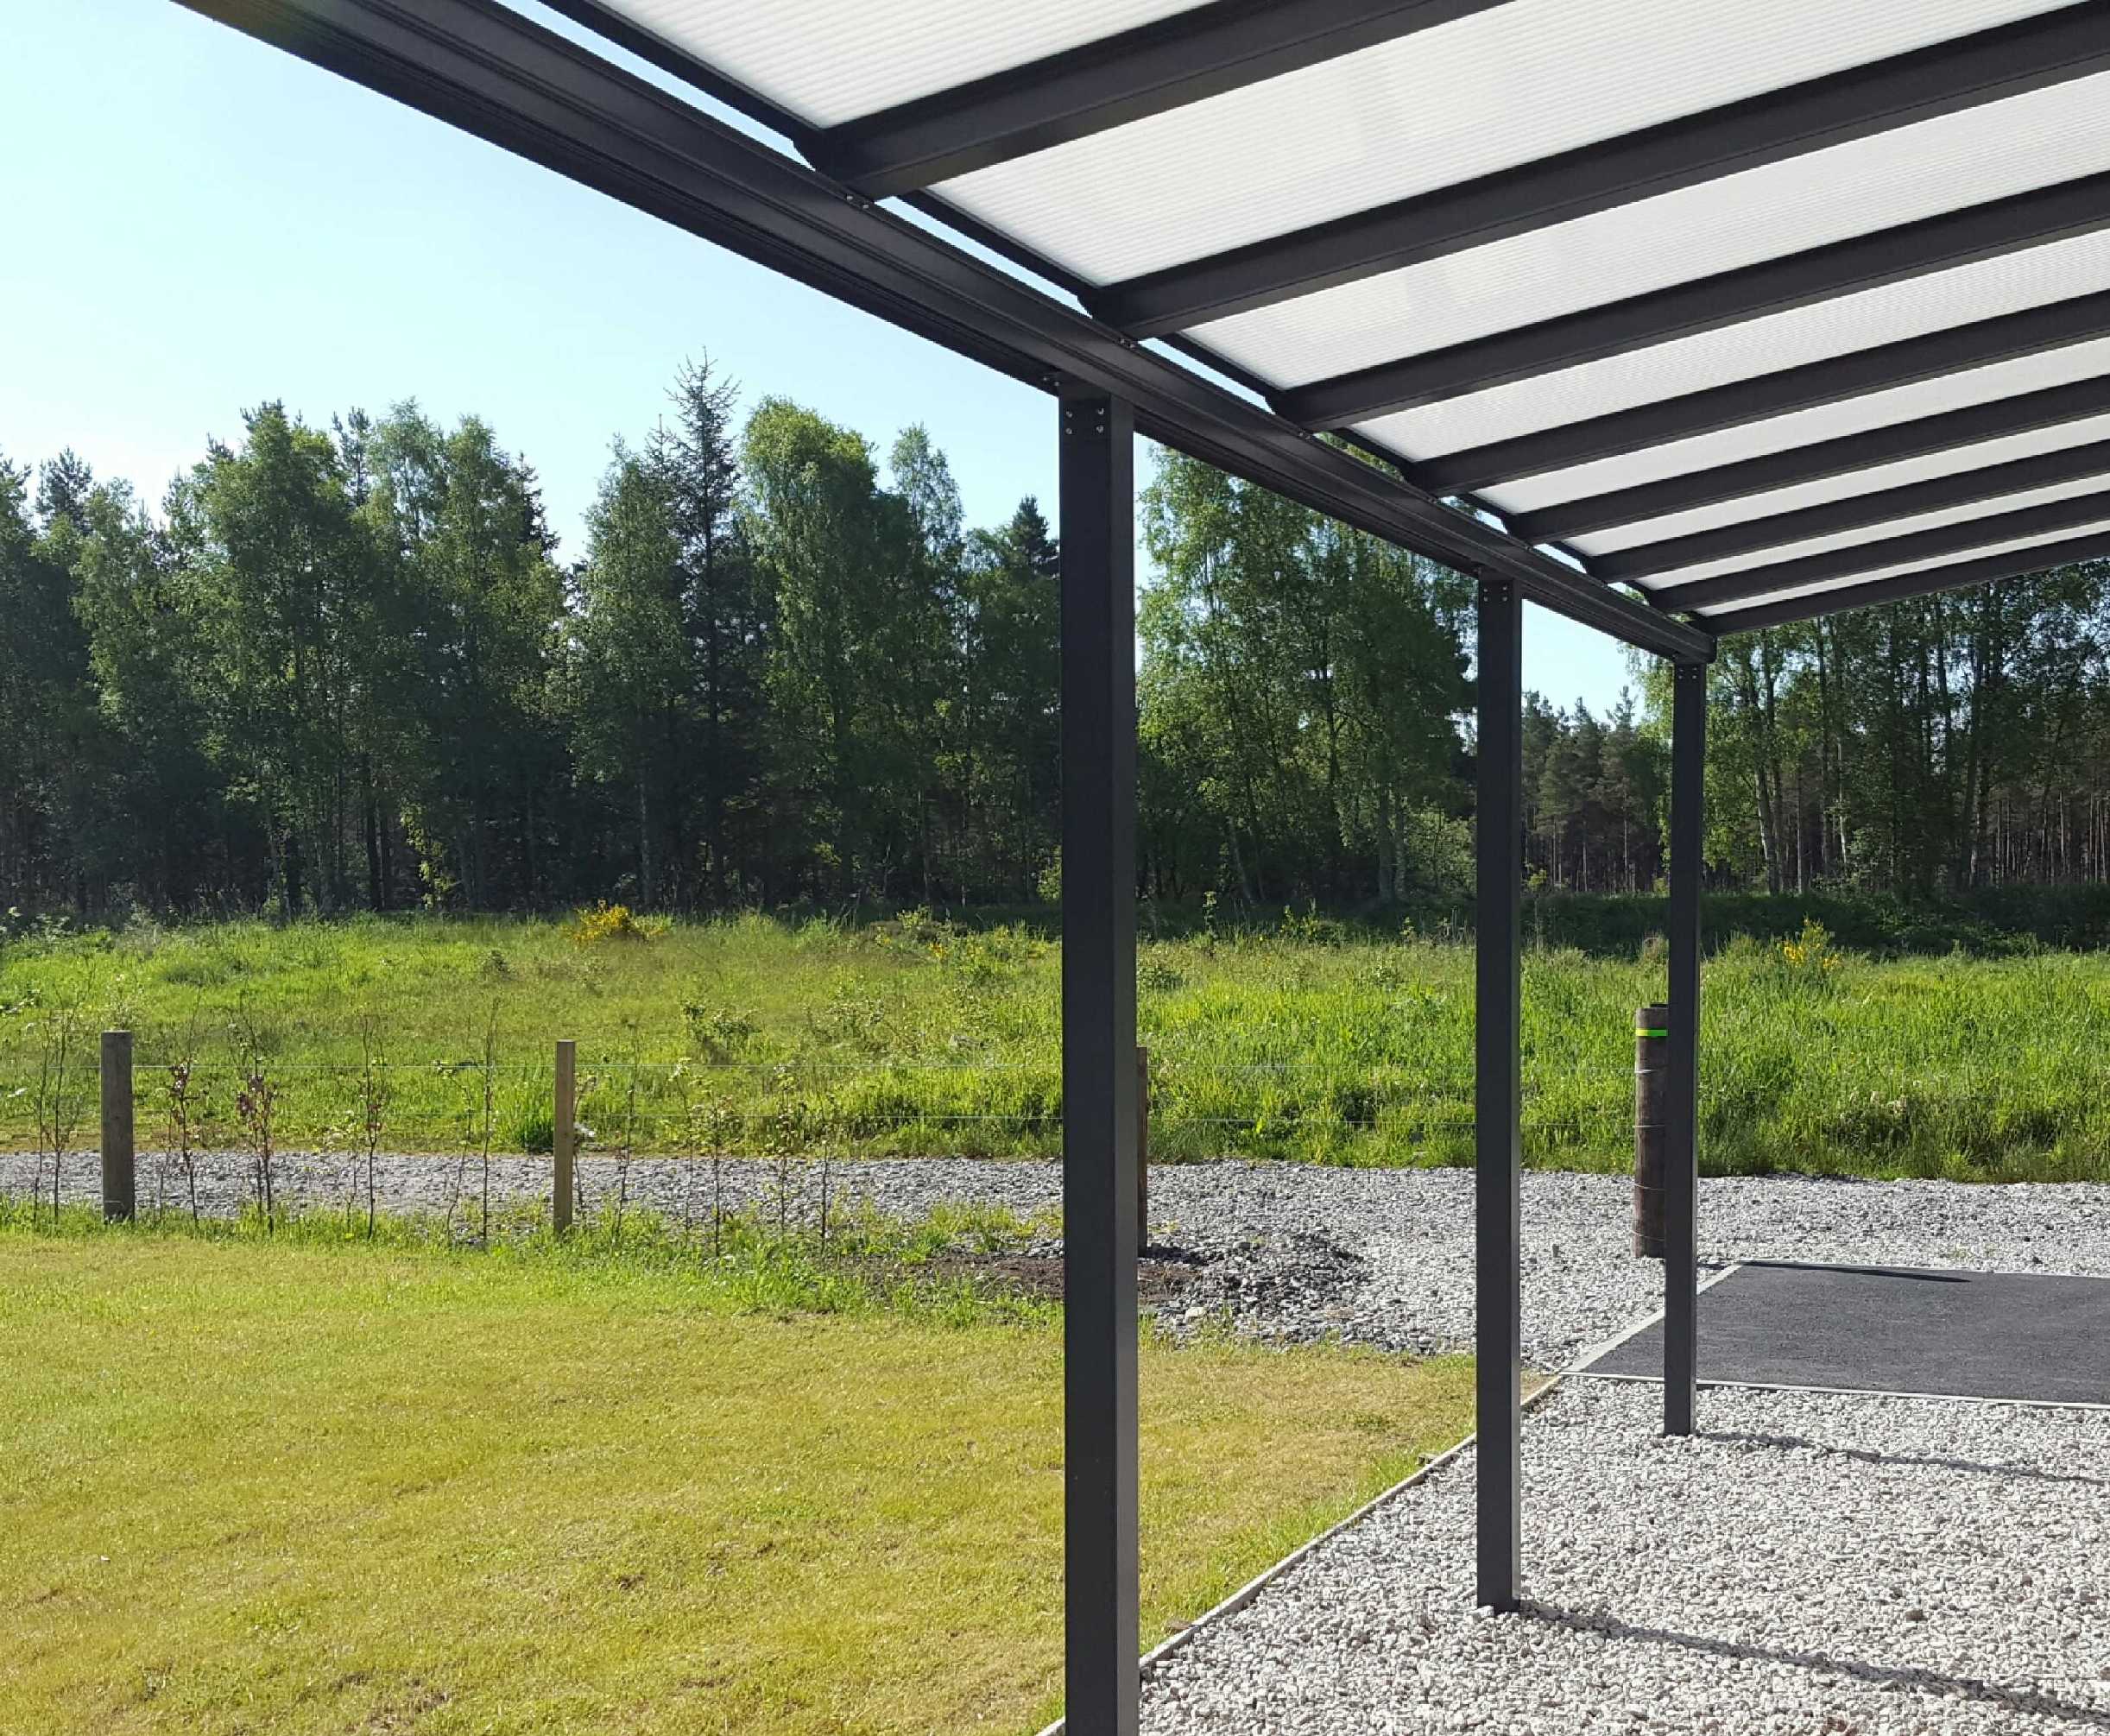 SPECIAL OFFER Omega Smart Lean-To Canopy, Anthracite Grey, 16mm Polycarbonate Glazing - 2.5m (W) x 2.5m (P), (2) Supporting Posts